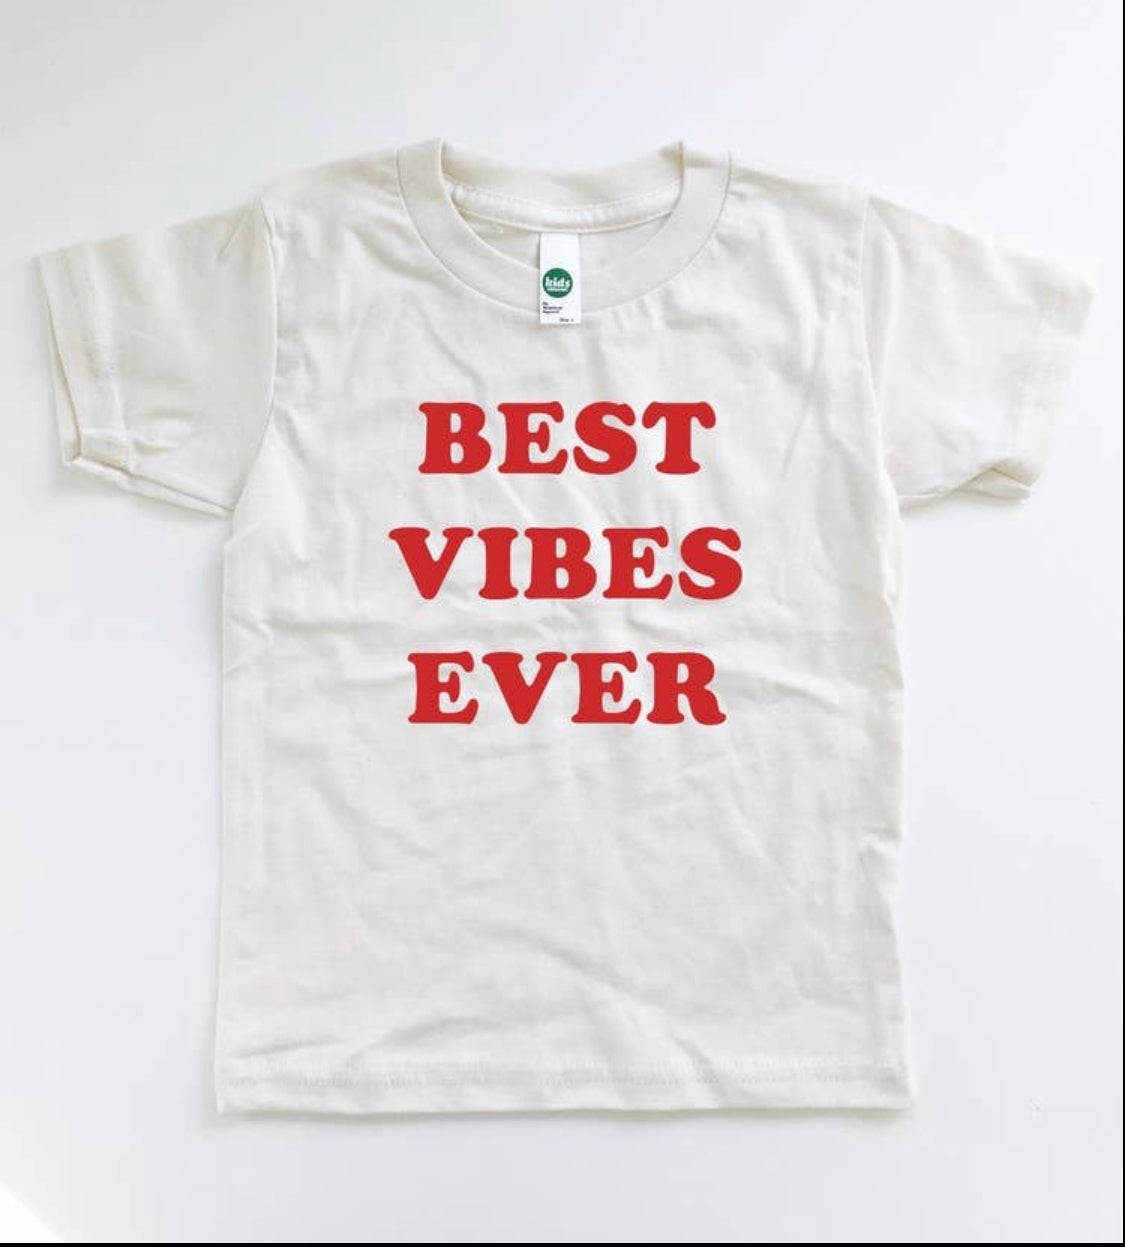 "Best Vibes Ever" Toddler Tee